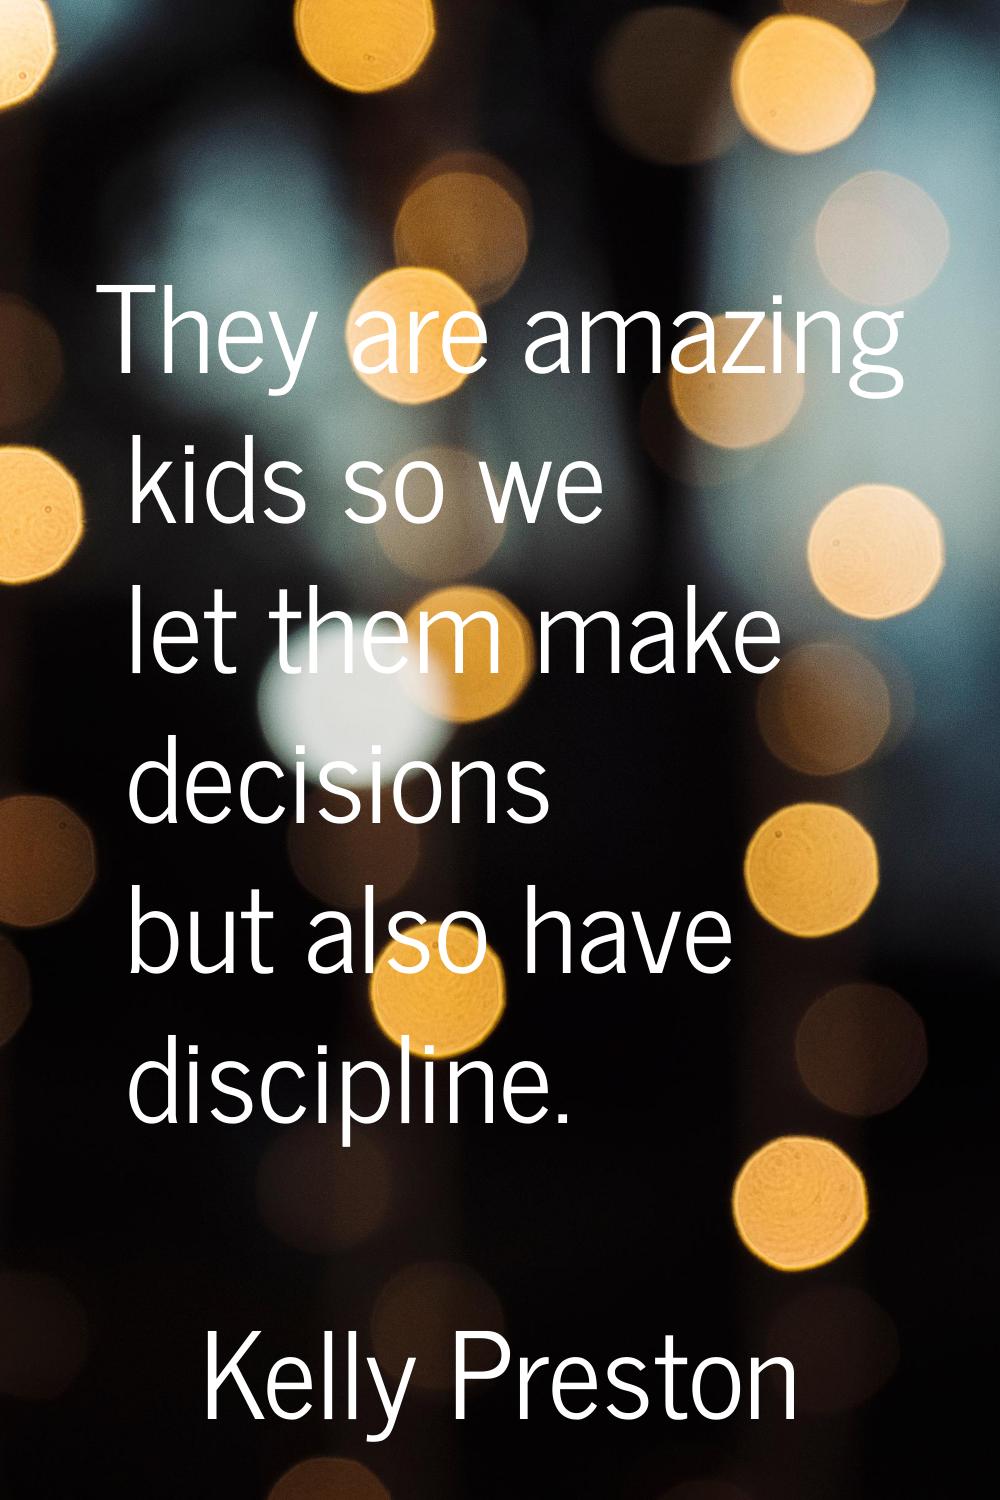 They are amazing kids so we let them make decisions but also have discipline.